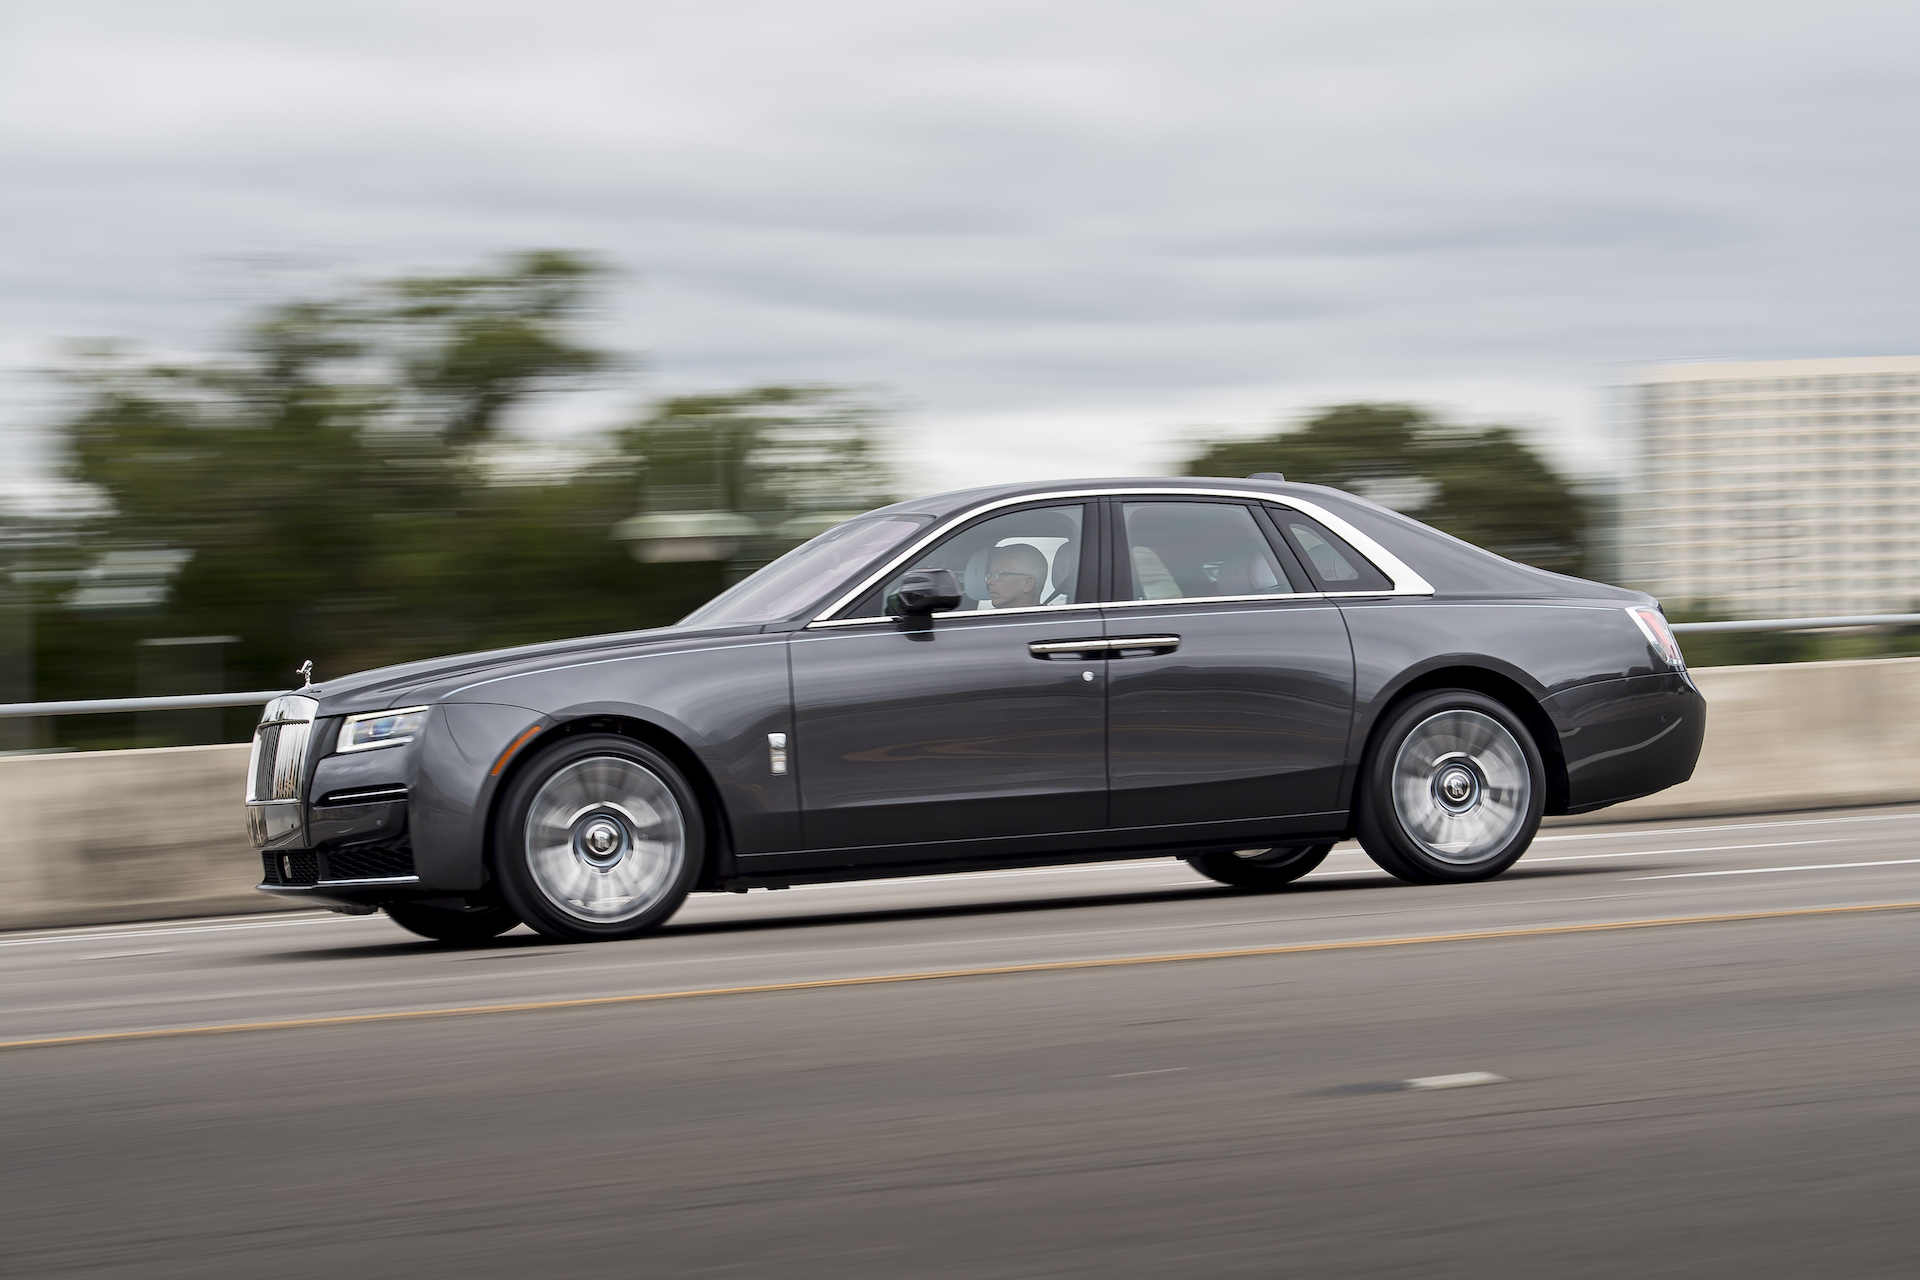 2021 Rolls-Royce Ghost First Drive - The Rolls for the Common Man